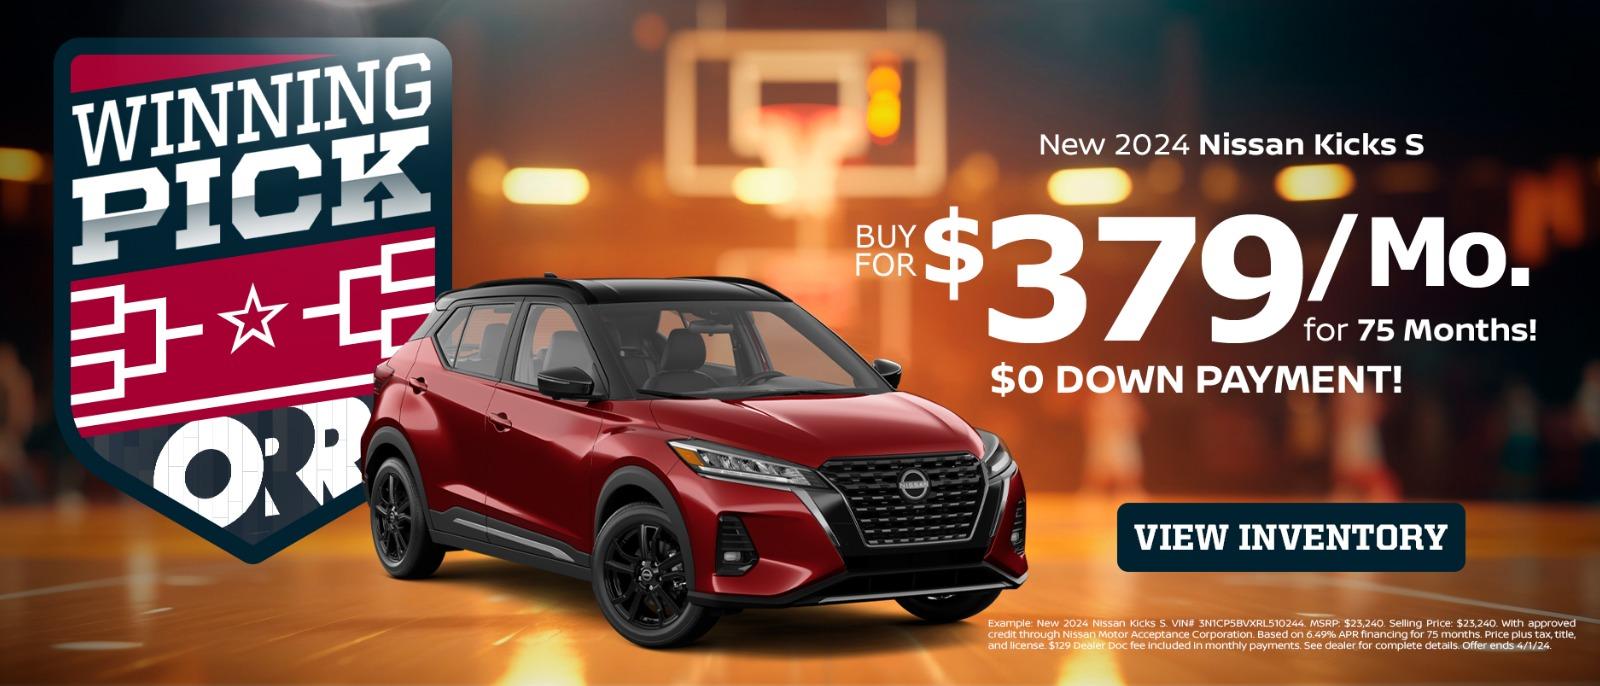 New 2024 Nissan Kicks S
Buy for $379/Mo. for 75 months!
$0 down payment